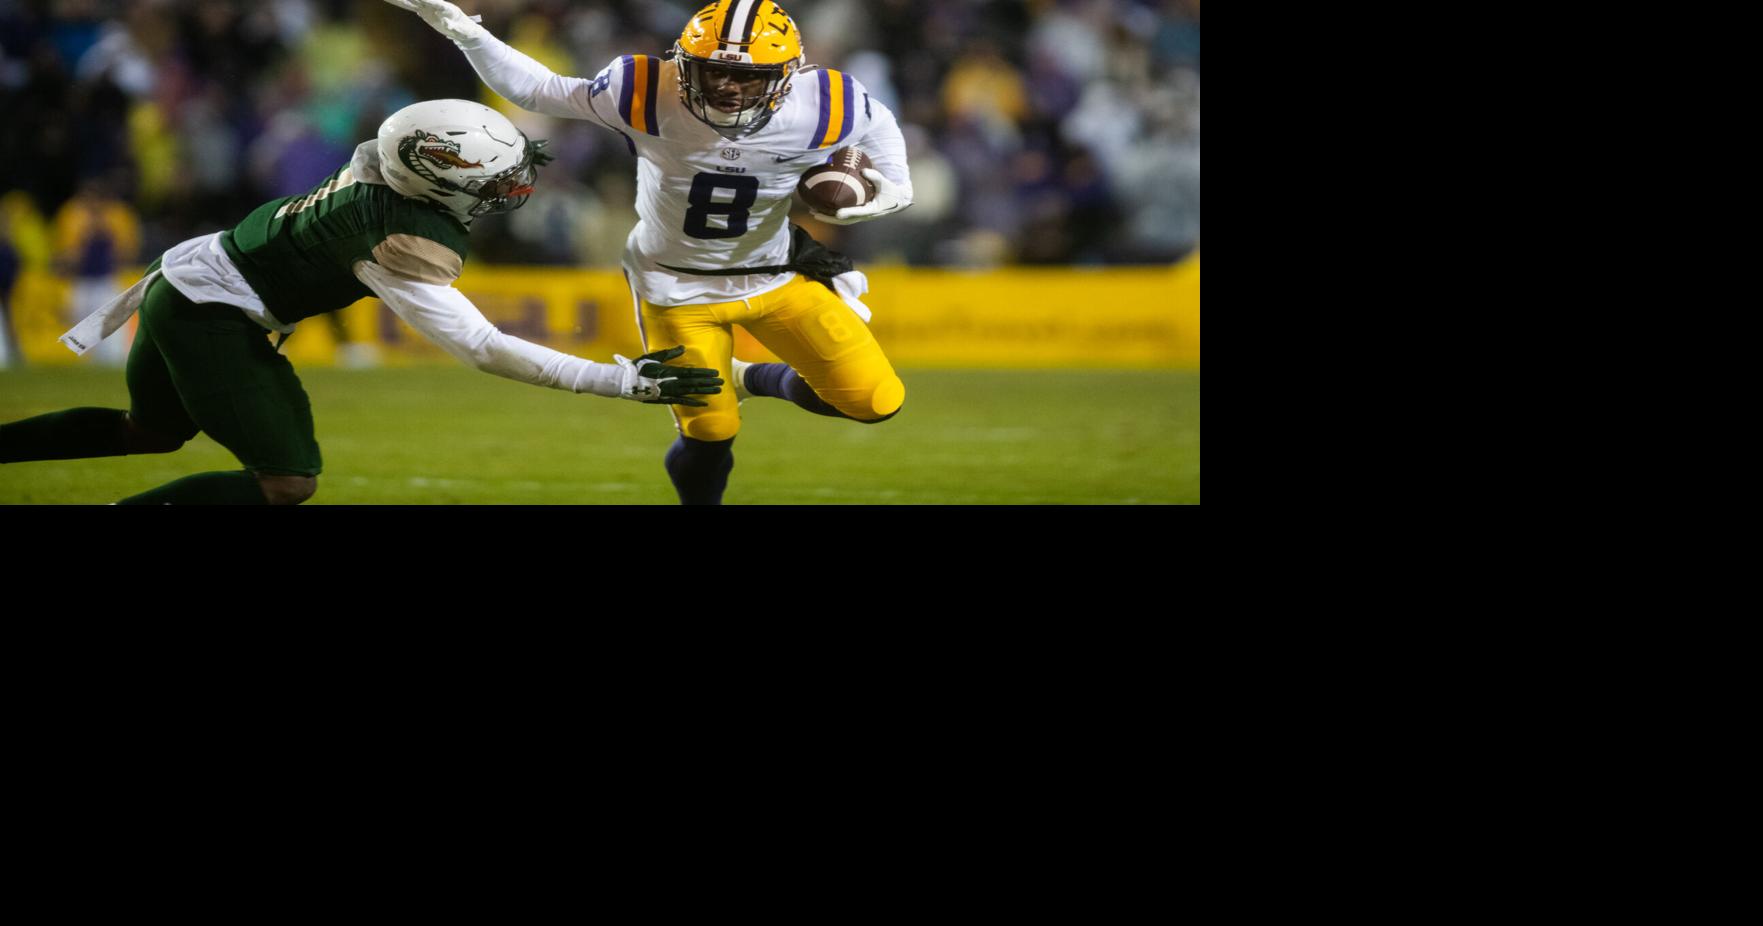 LSU Receivers Ja'Marr Chase, Justin Jefferson Named Semifinalists